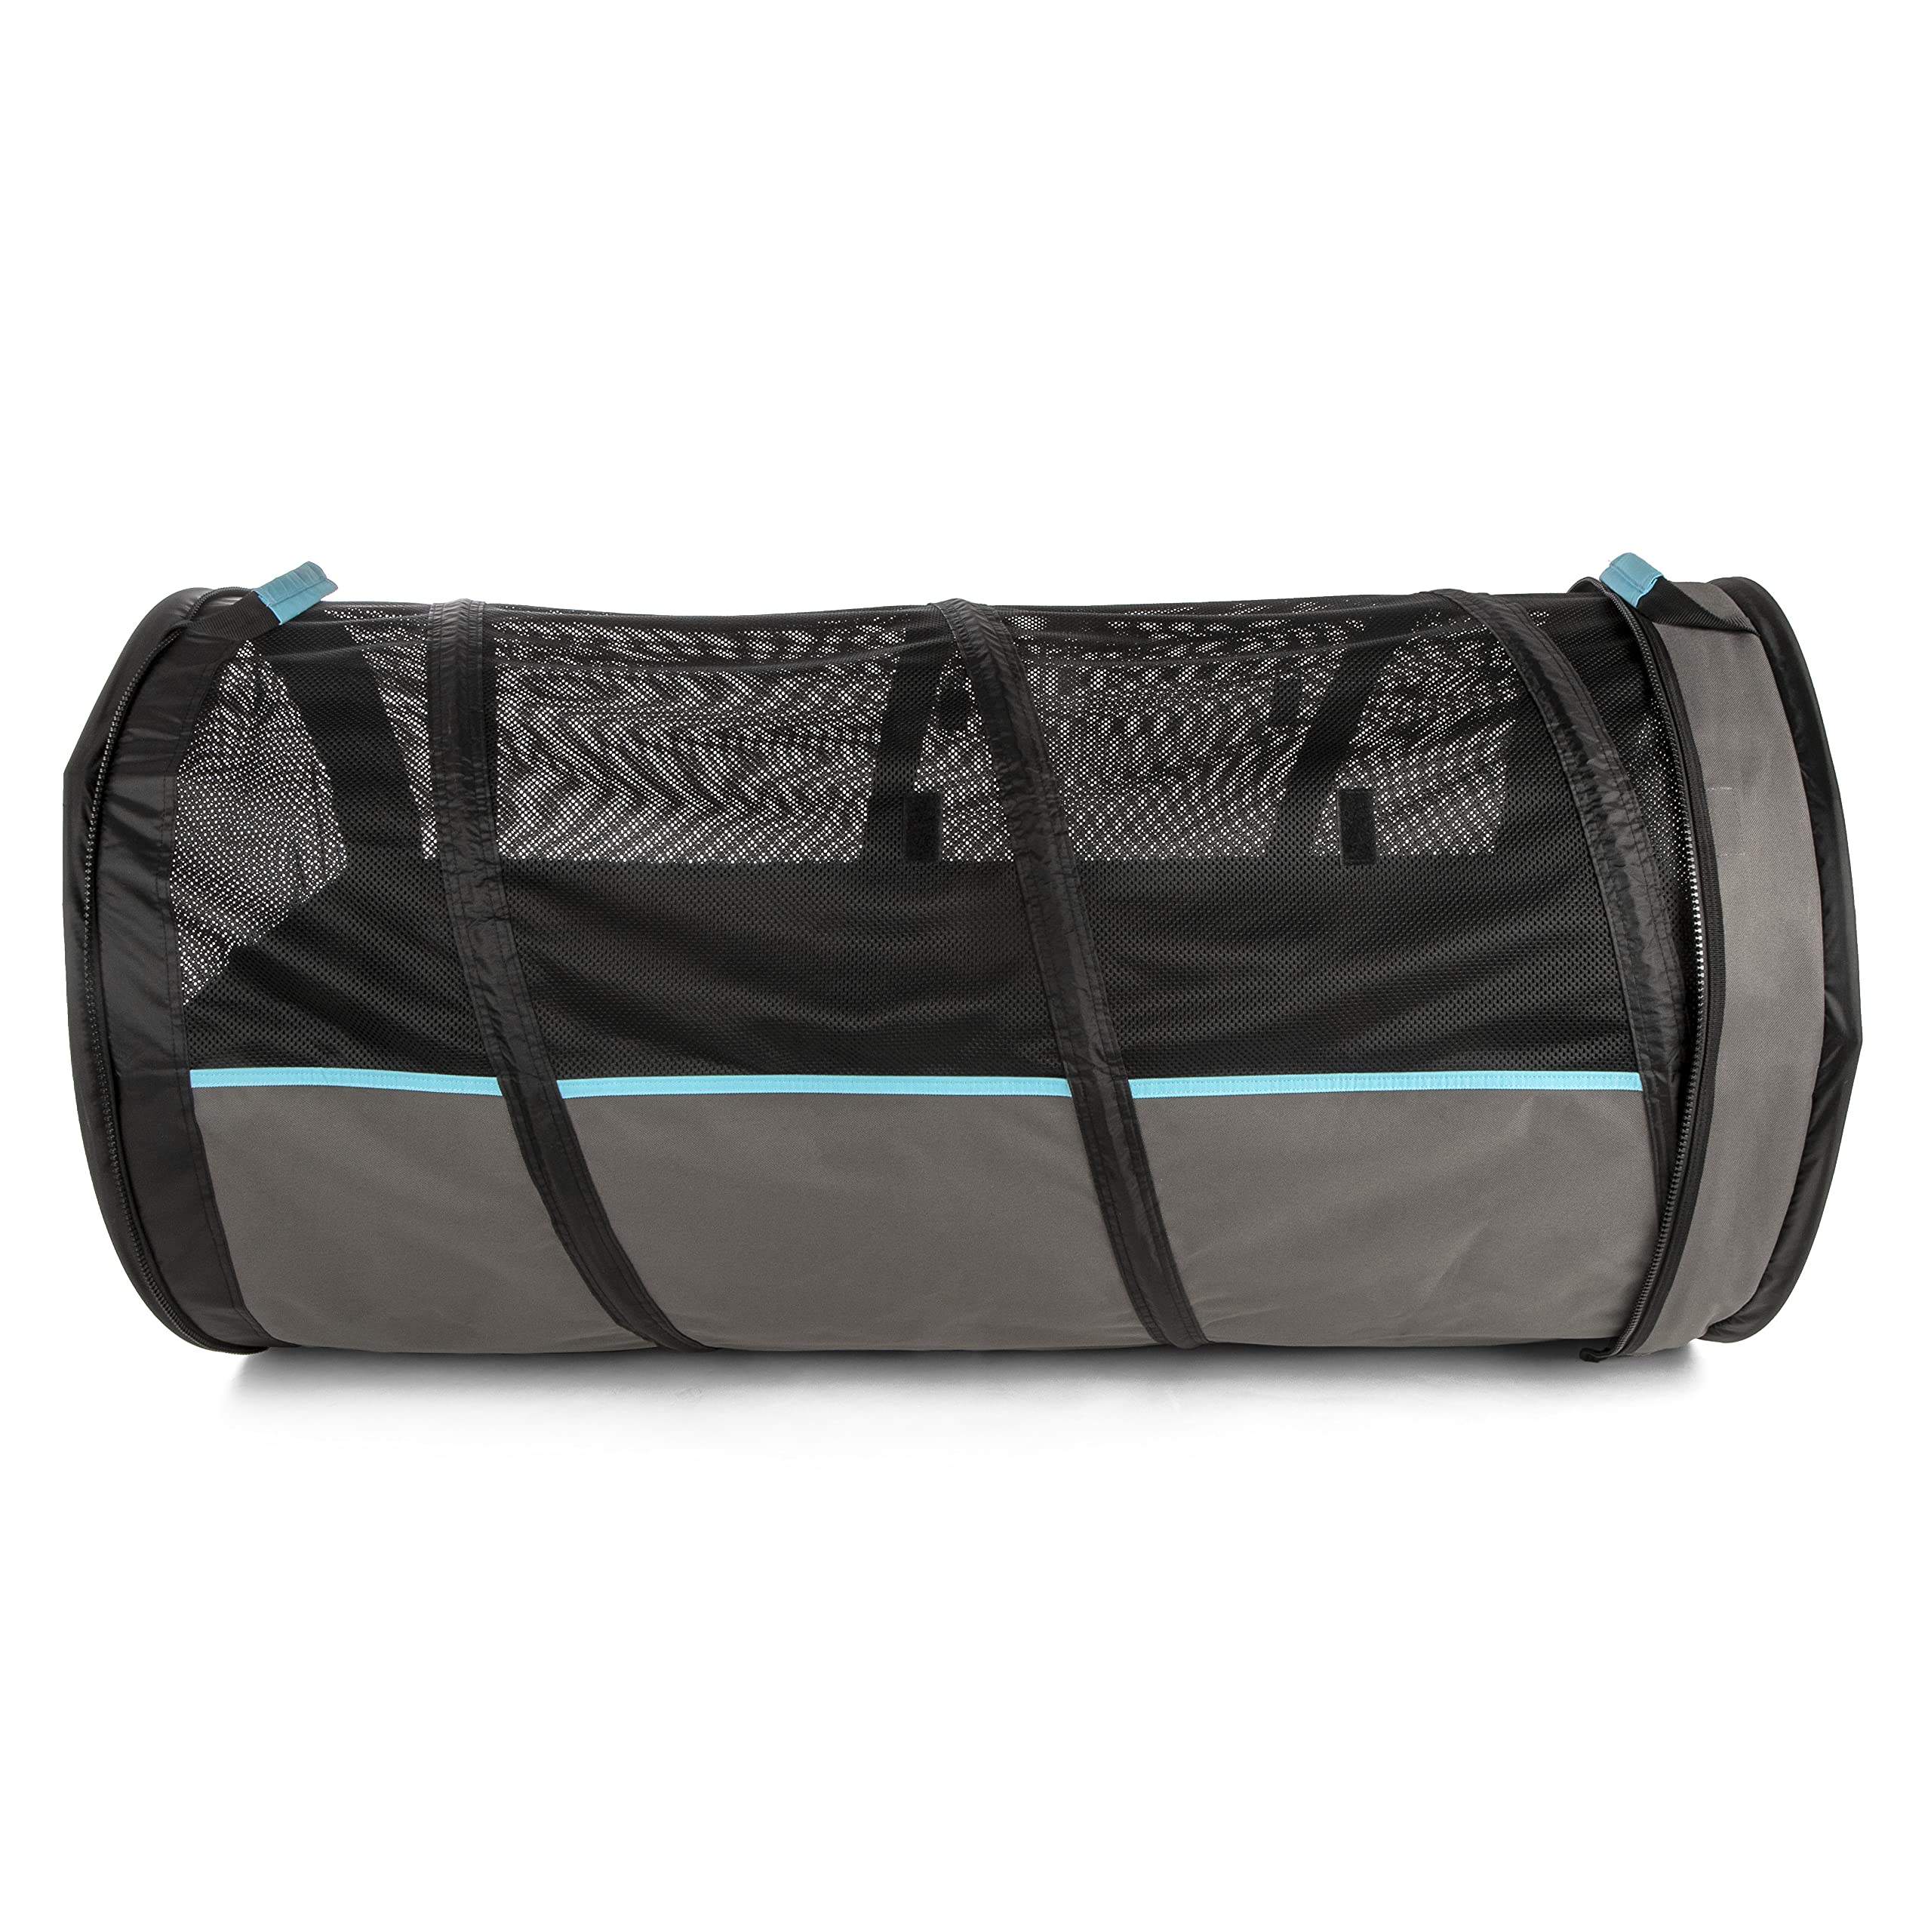 Sherpa Pet Tube Tunnel Pet Carrier, Soft-Sided Portable Popup Car Kennel for Dogs & Cats - Lightweight, Claw-Resistant Fabric, Mesh Panels, Washable - Black & Gray, One Size